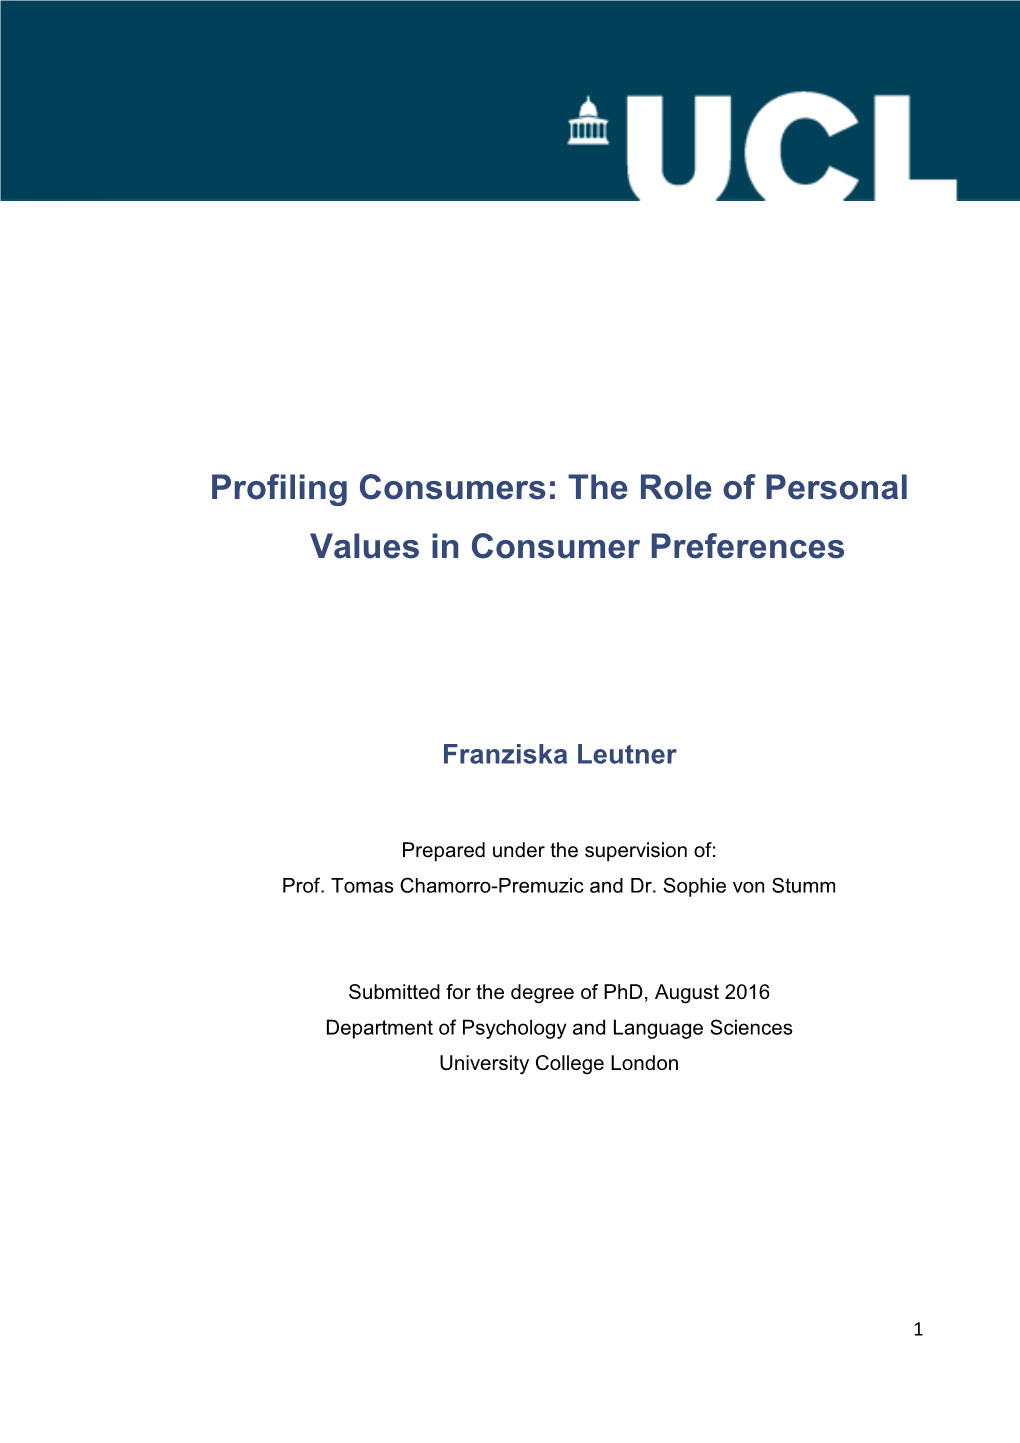 The Role of Personal Values in Consumer Preferences